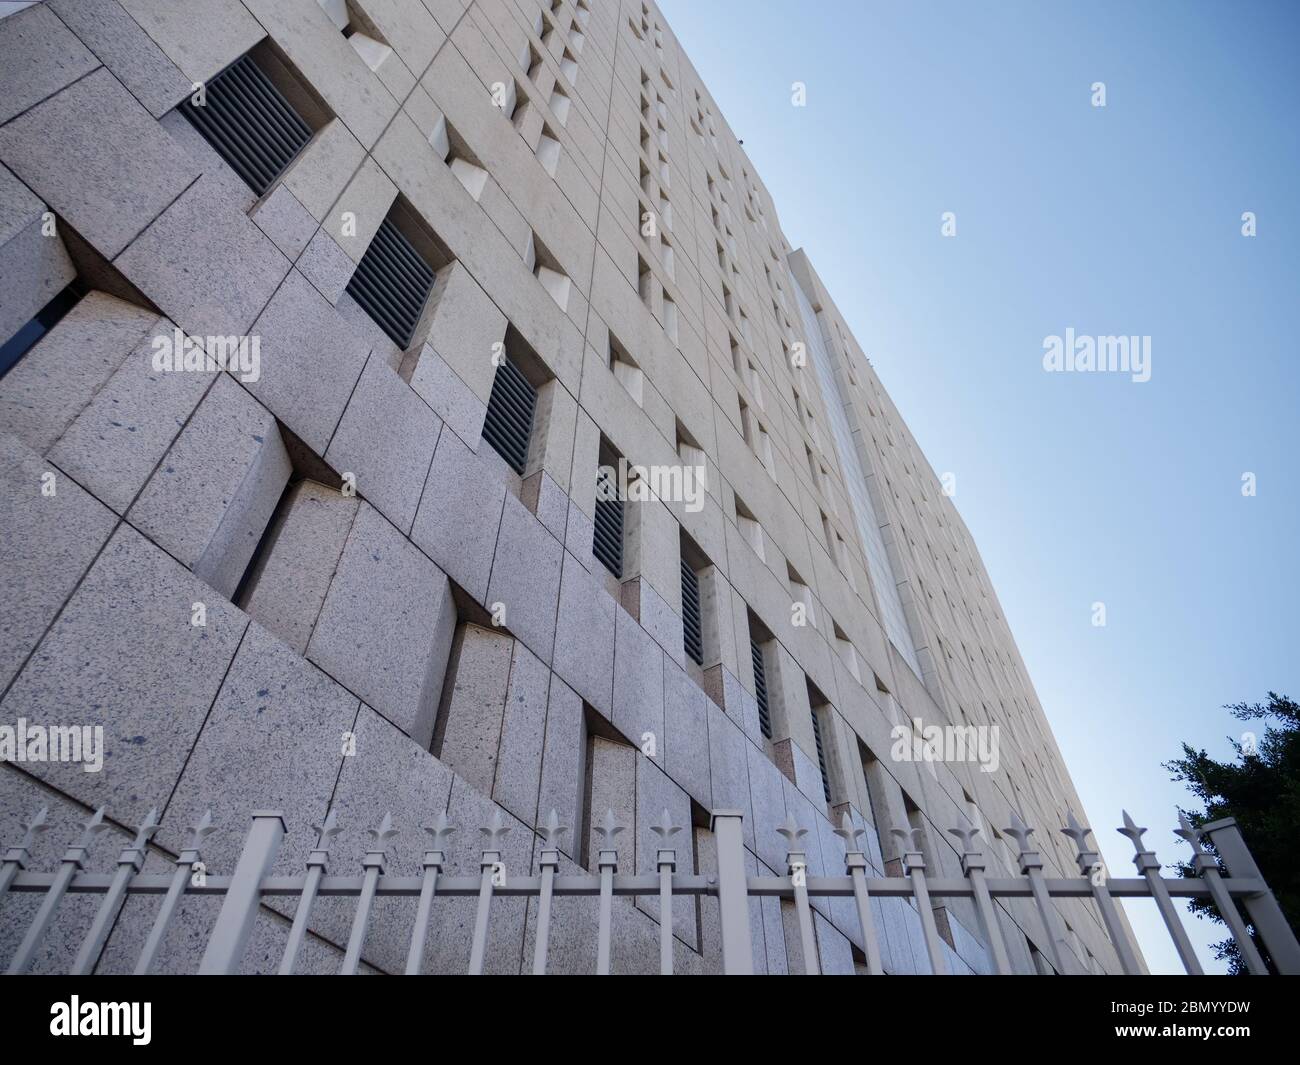 Prison Correctional Facility with Fence Low Angle Stock Photo